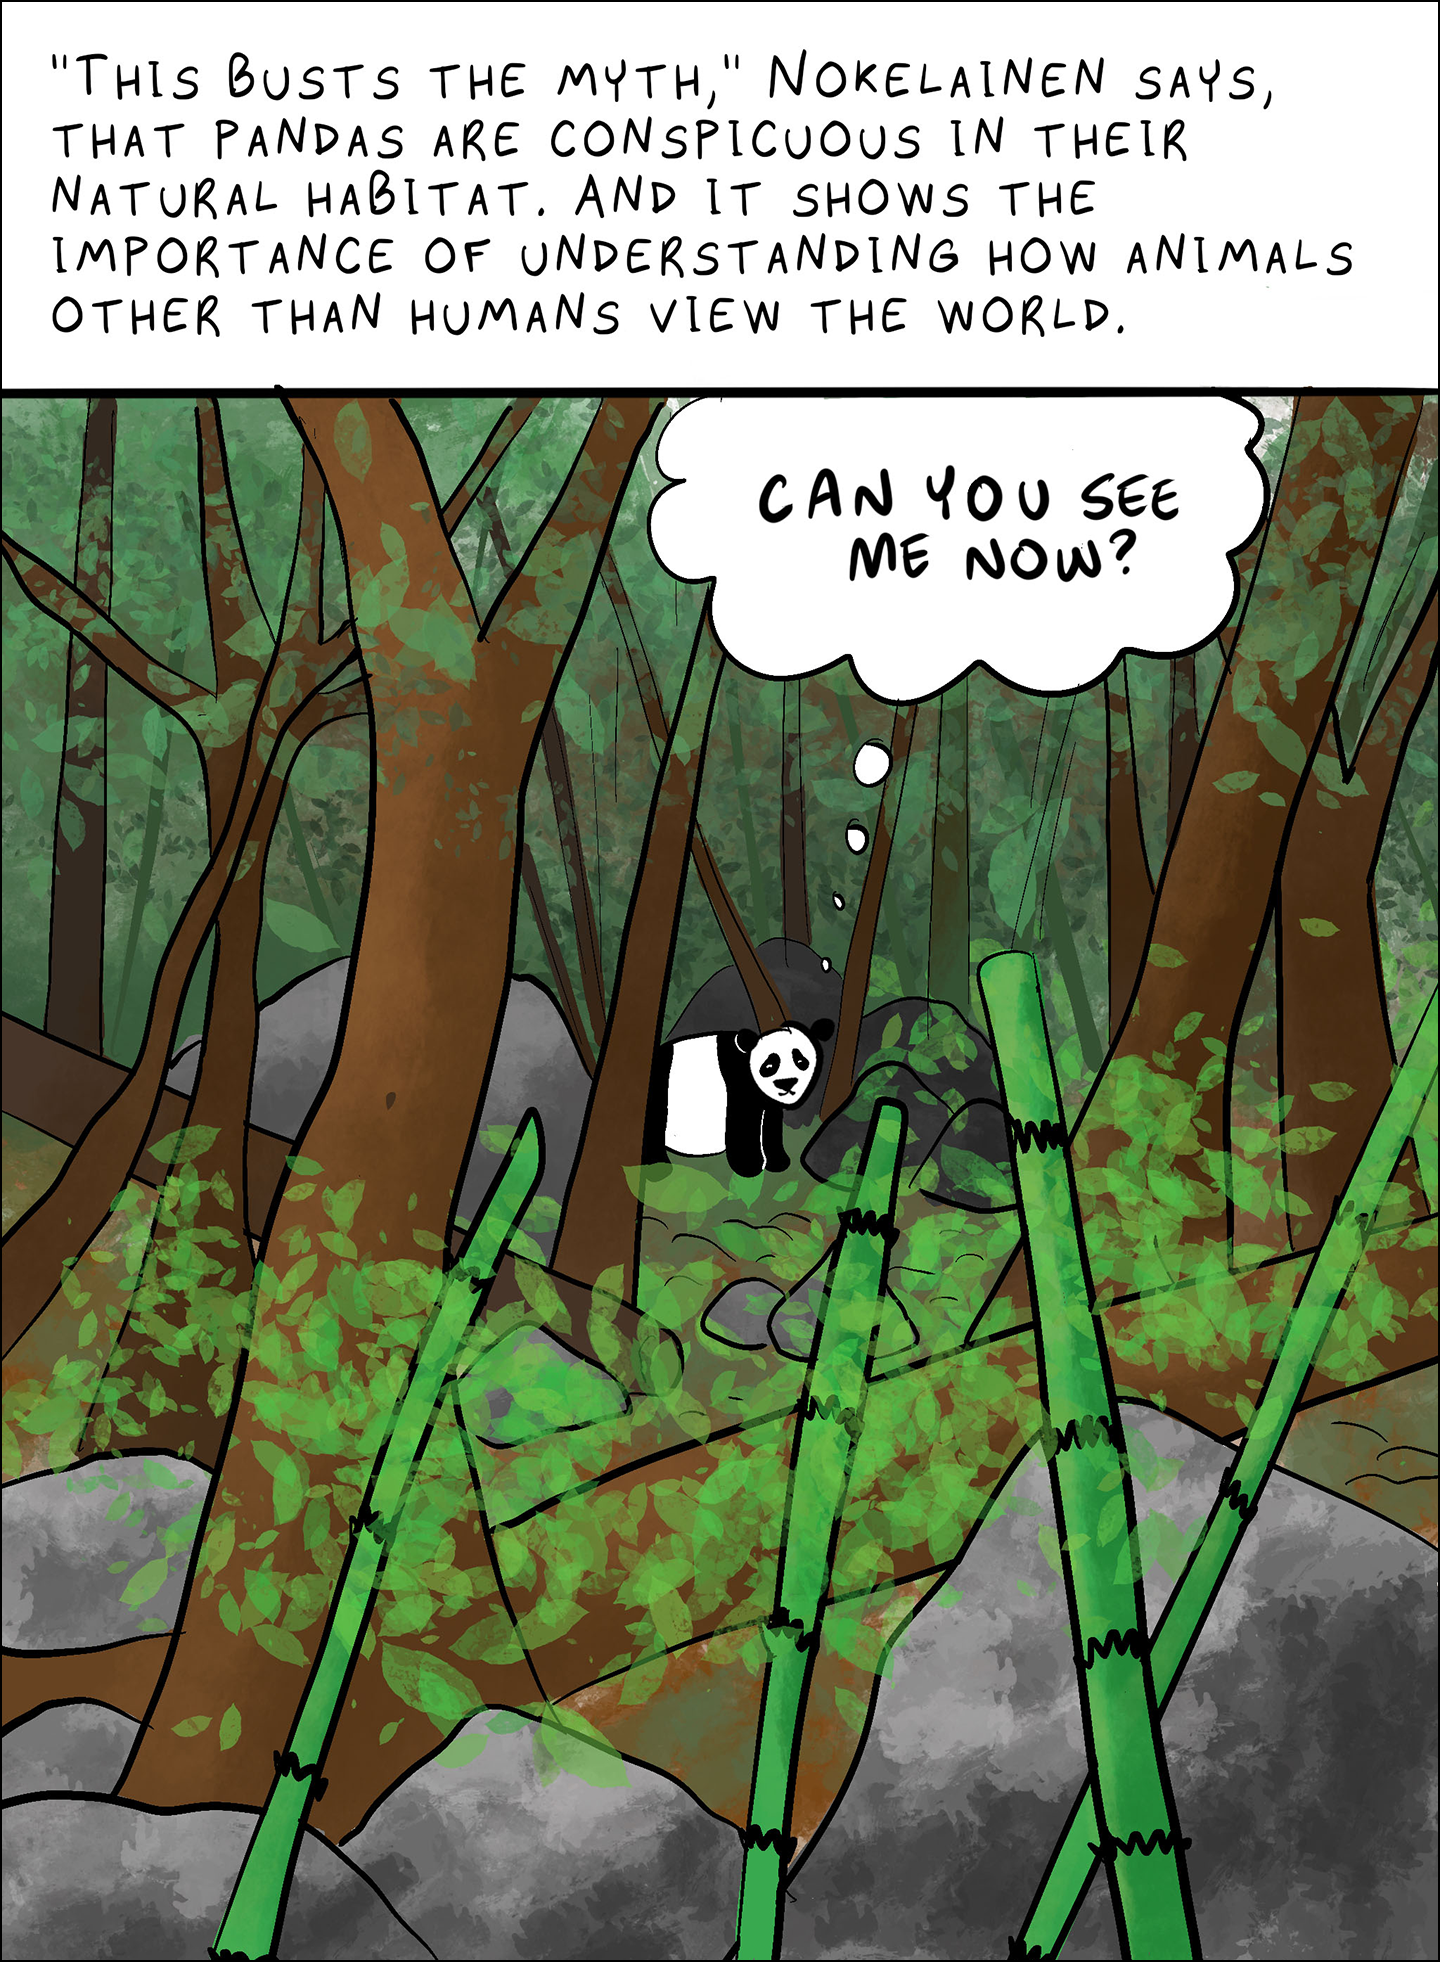 Text: “This busts the myth,” Nokelainen says, that pandas are conspicuous in their natural habitat. And it shows the importance of understanding how animals other than humans view the world. Image: A drawing of a panda in the rear of the picture behind trees, rocks and bamboo. Panda's thought bubble: Can you see me now?